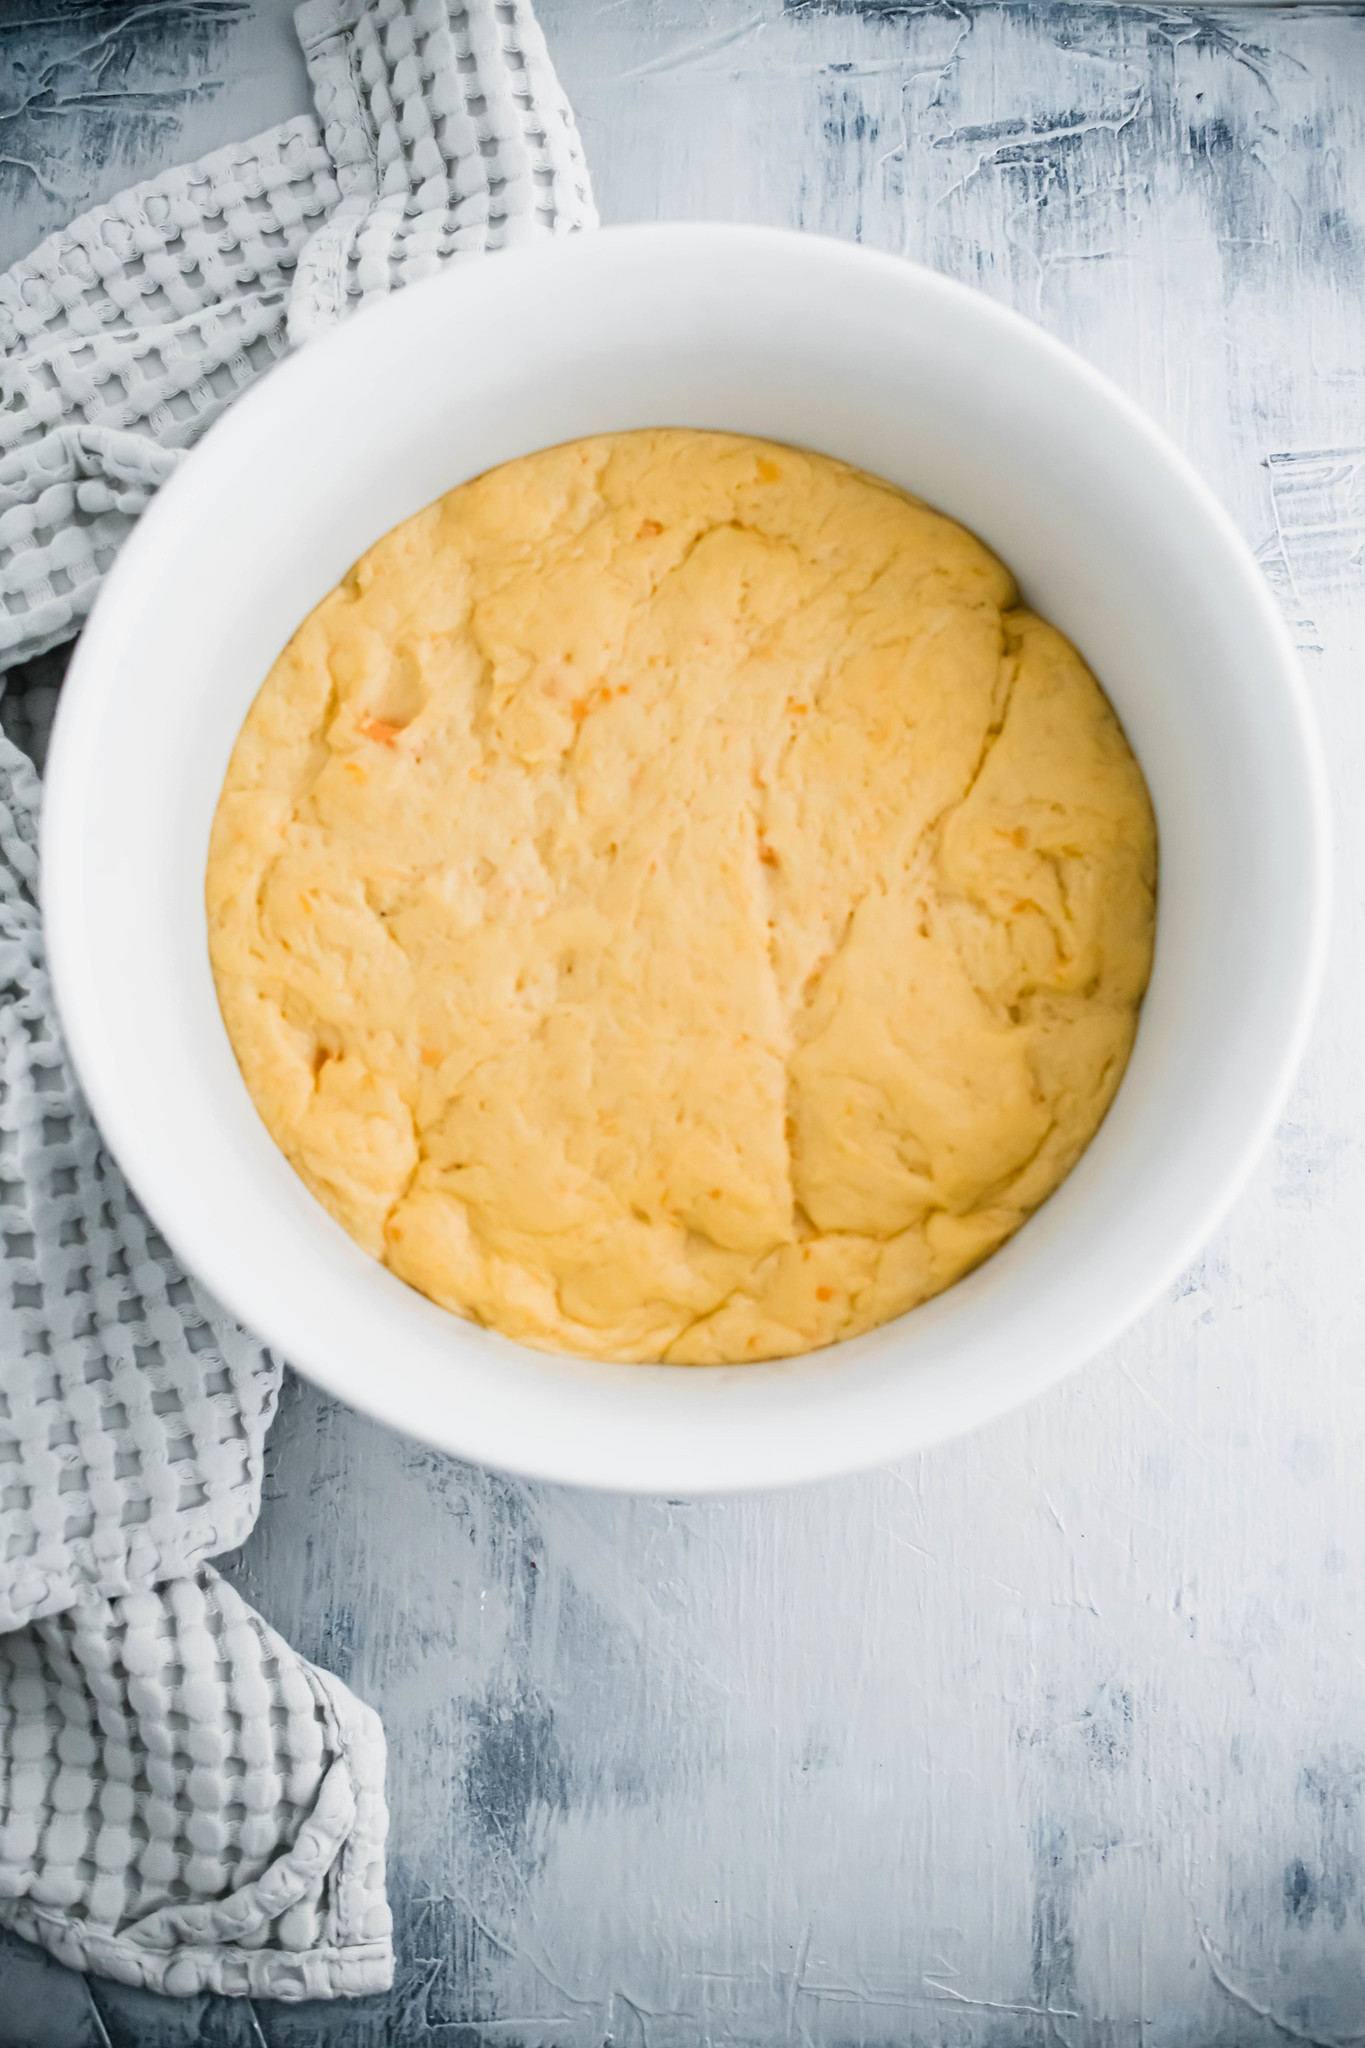 Sweet potato roll dough in a large white bowl after it has risen.